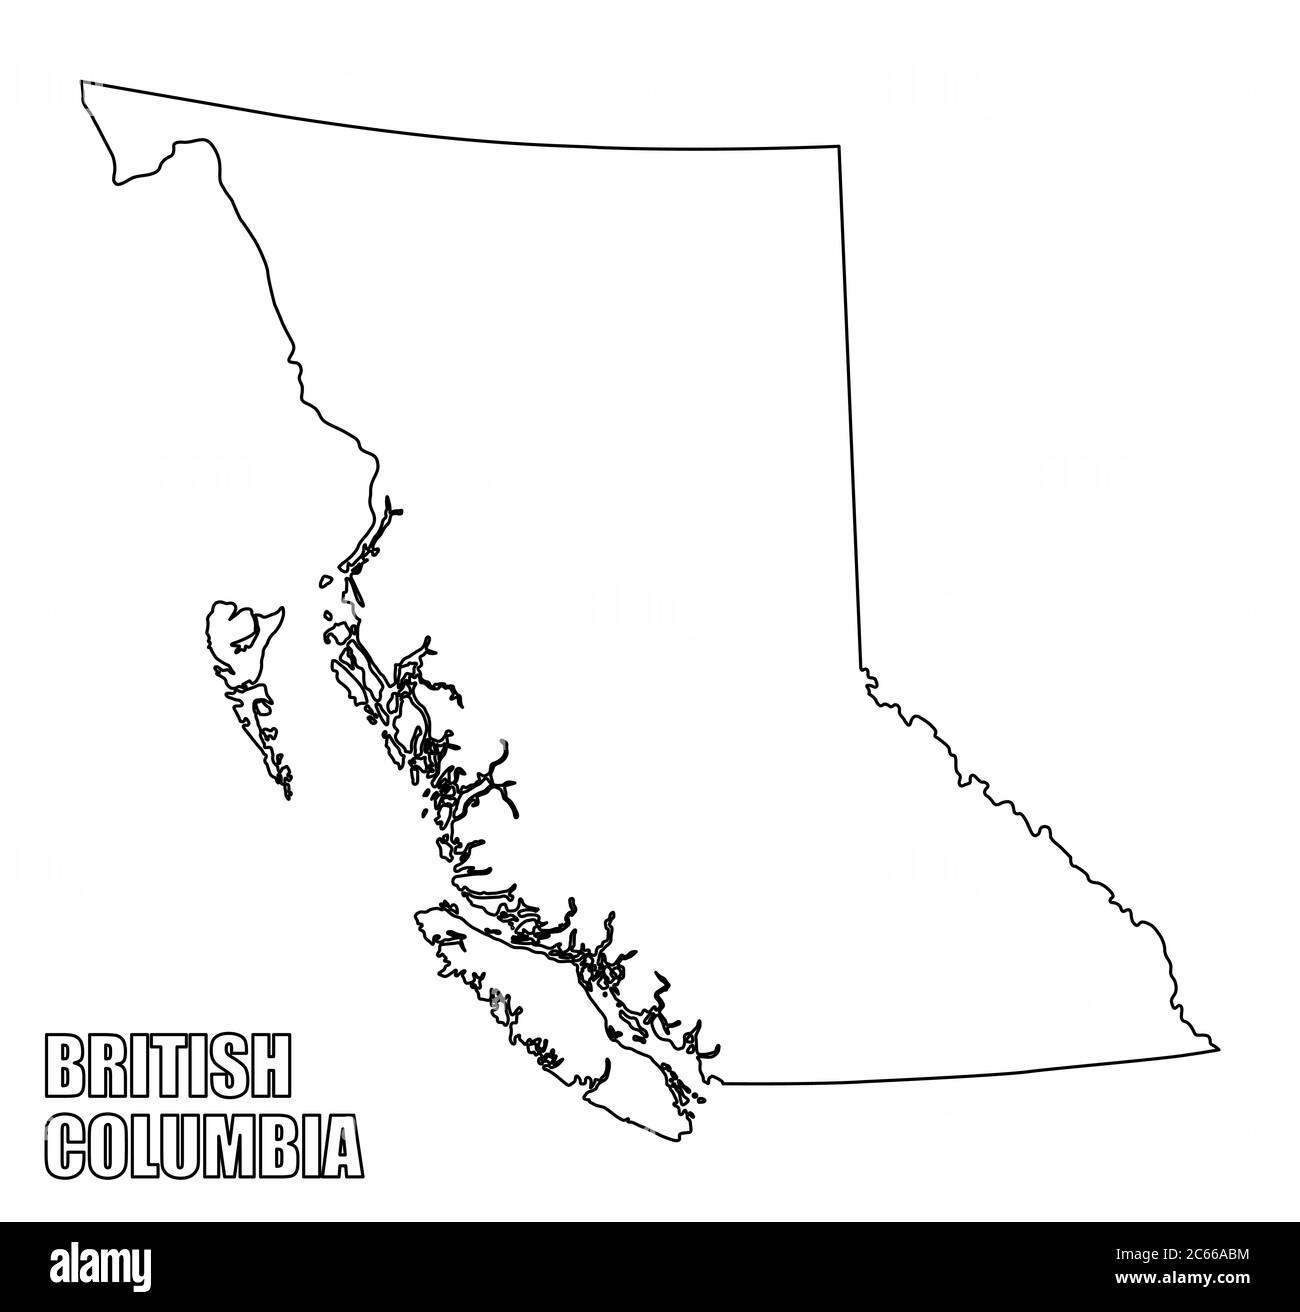 British Columbia province outline map Stock Vector